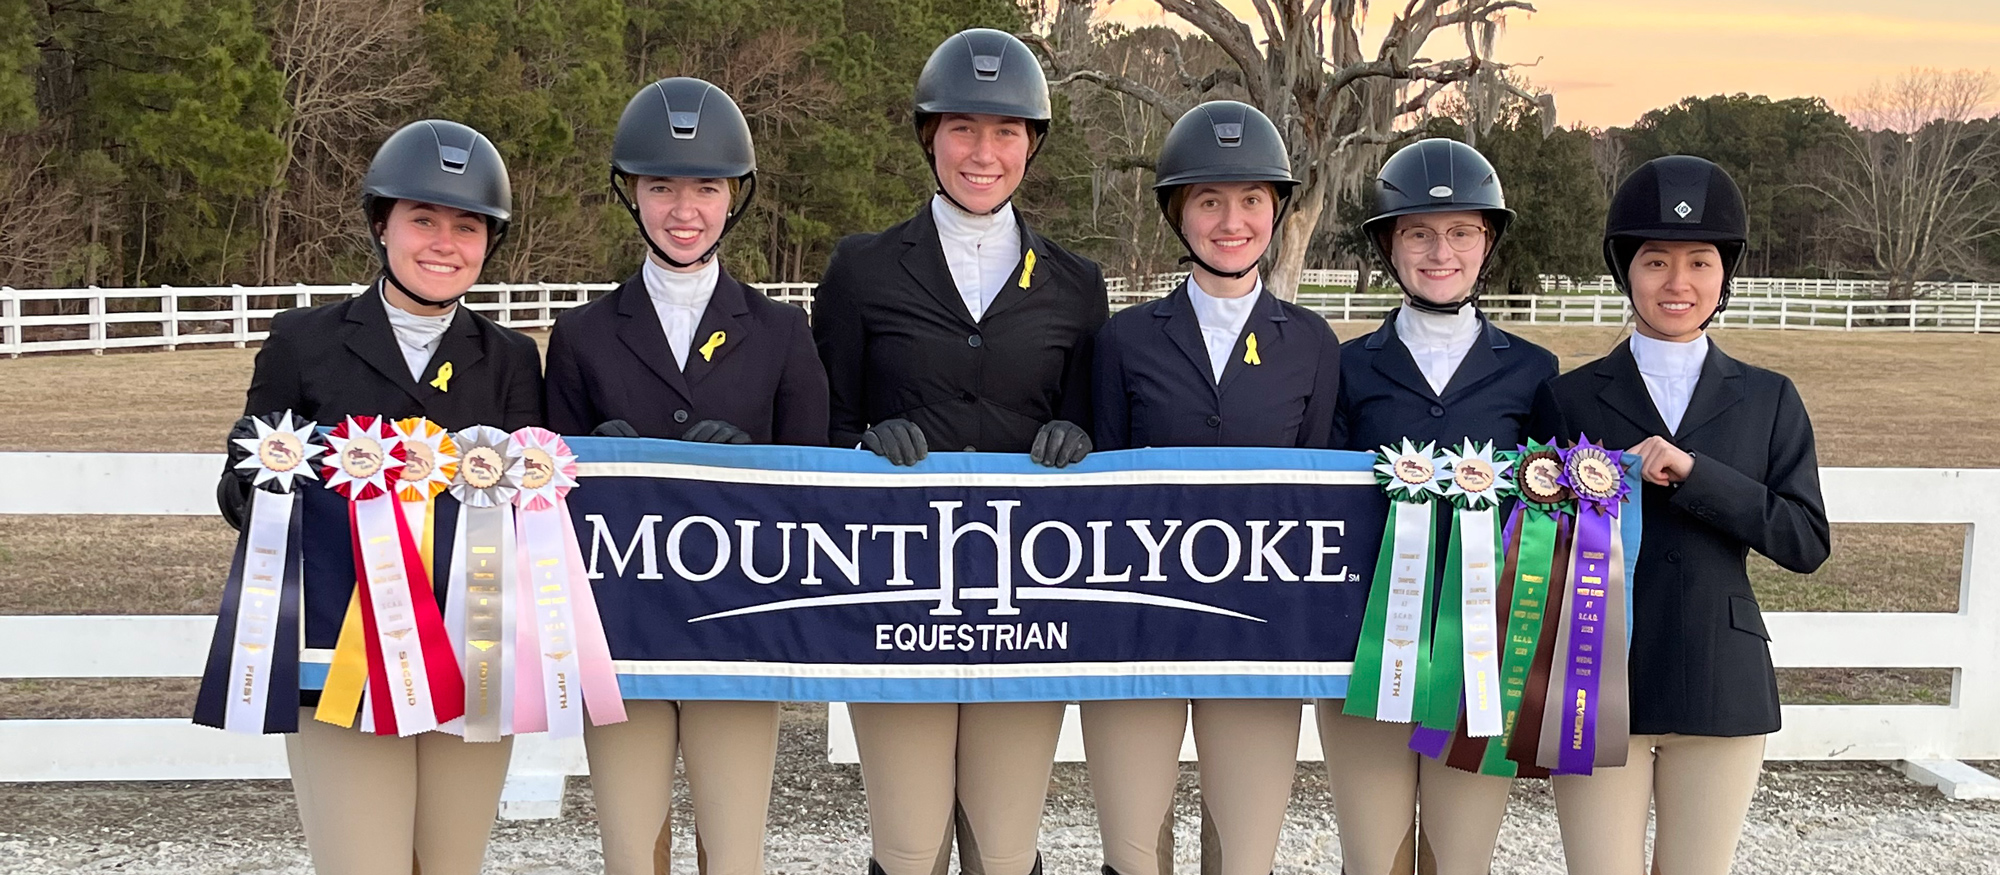 Riding team earns top-10 finish at Winter Classic Tournament of Champions